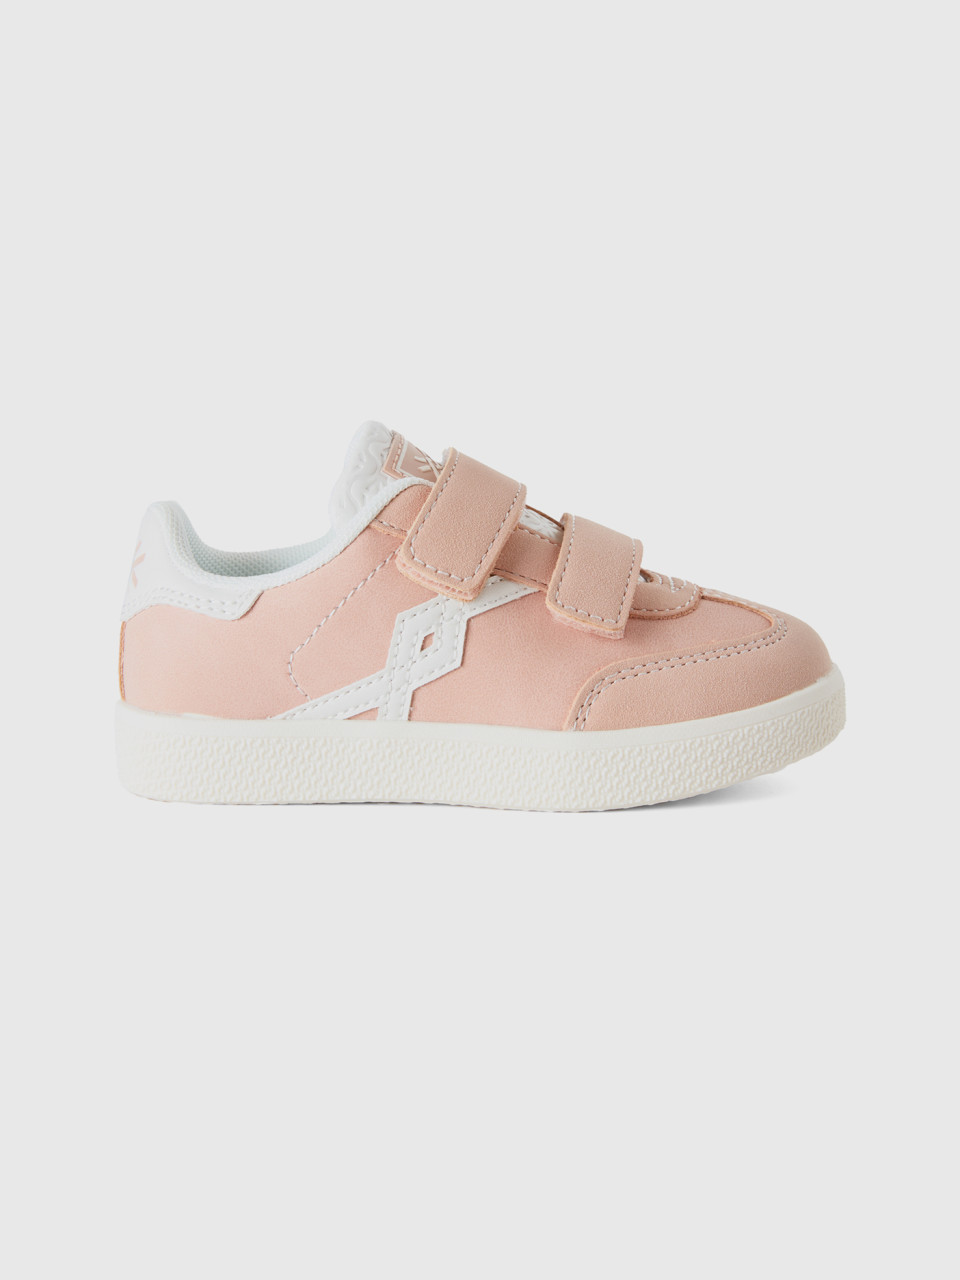 Benetton, Sneakers In Imitation Leather,5C, Soft Pink